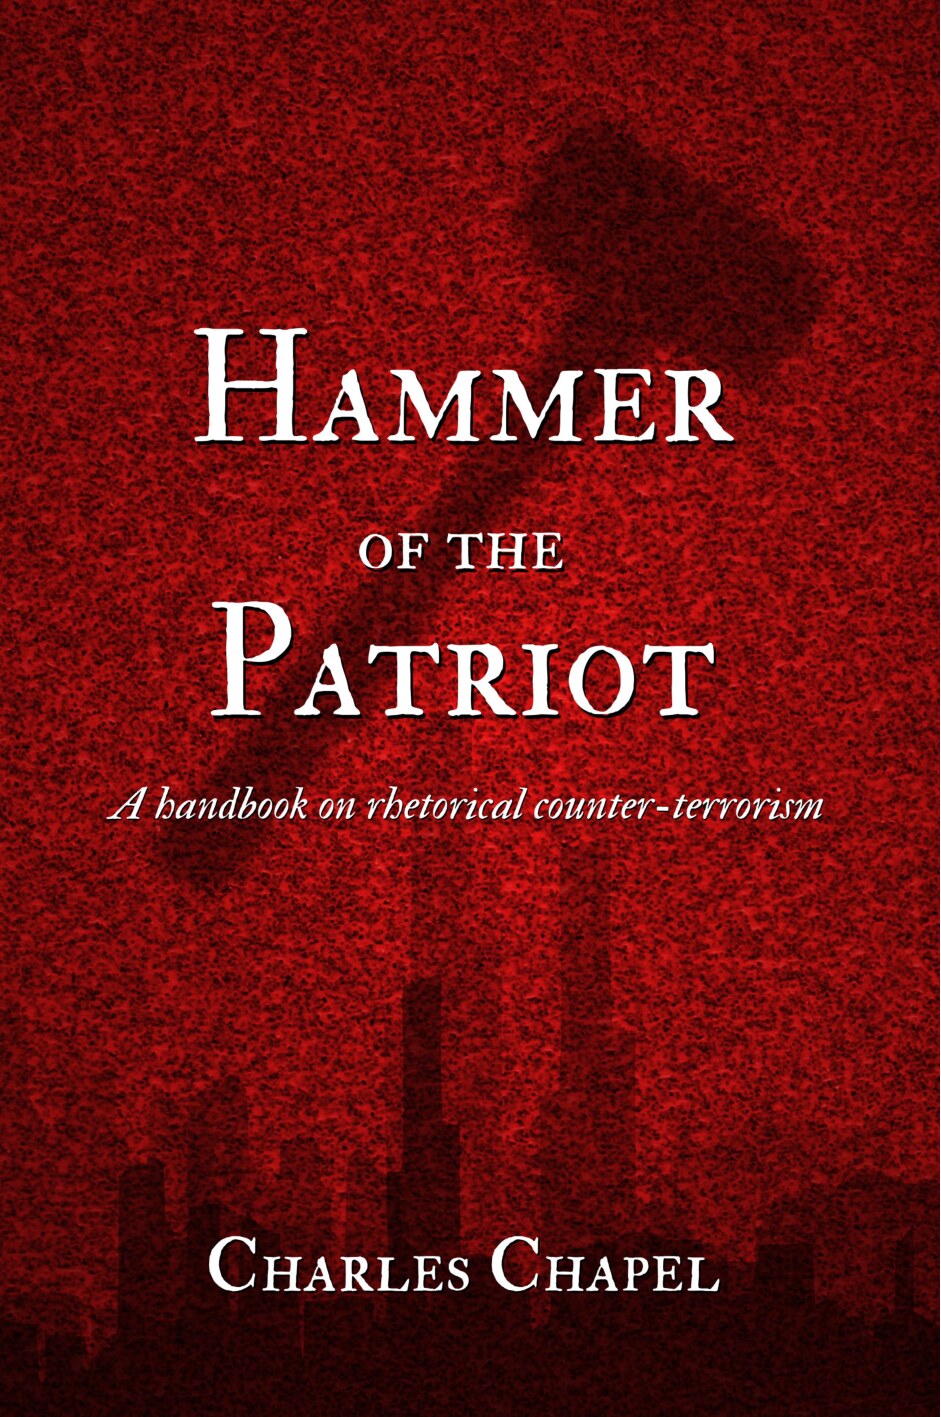 Chapel, Charles; Hammer of the Patriot